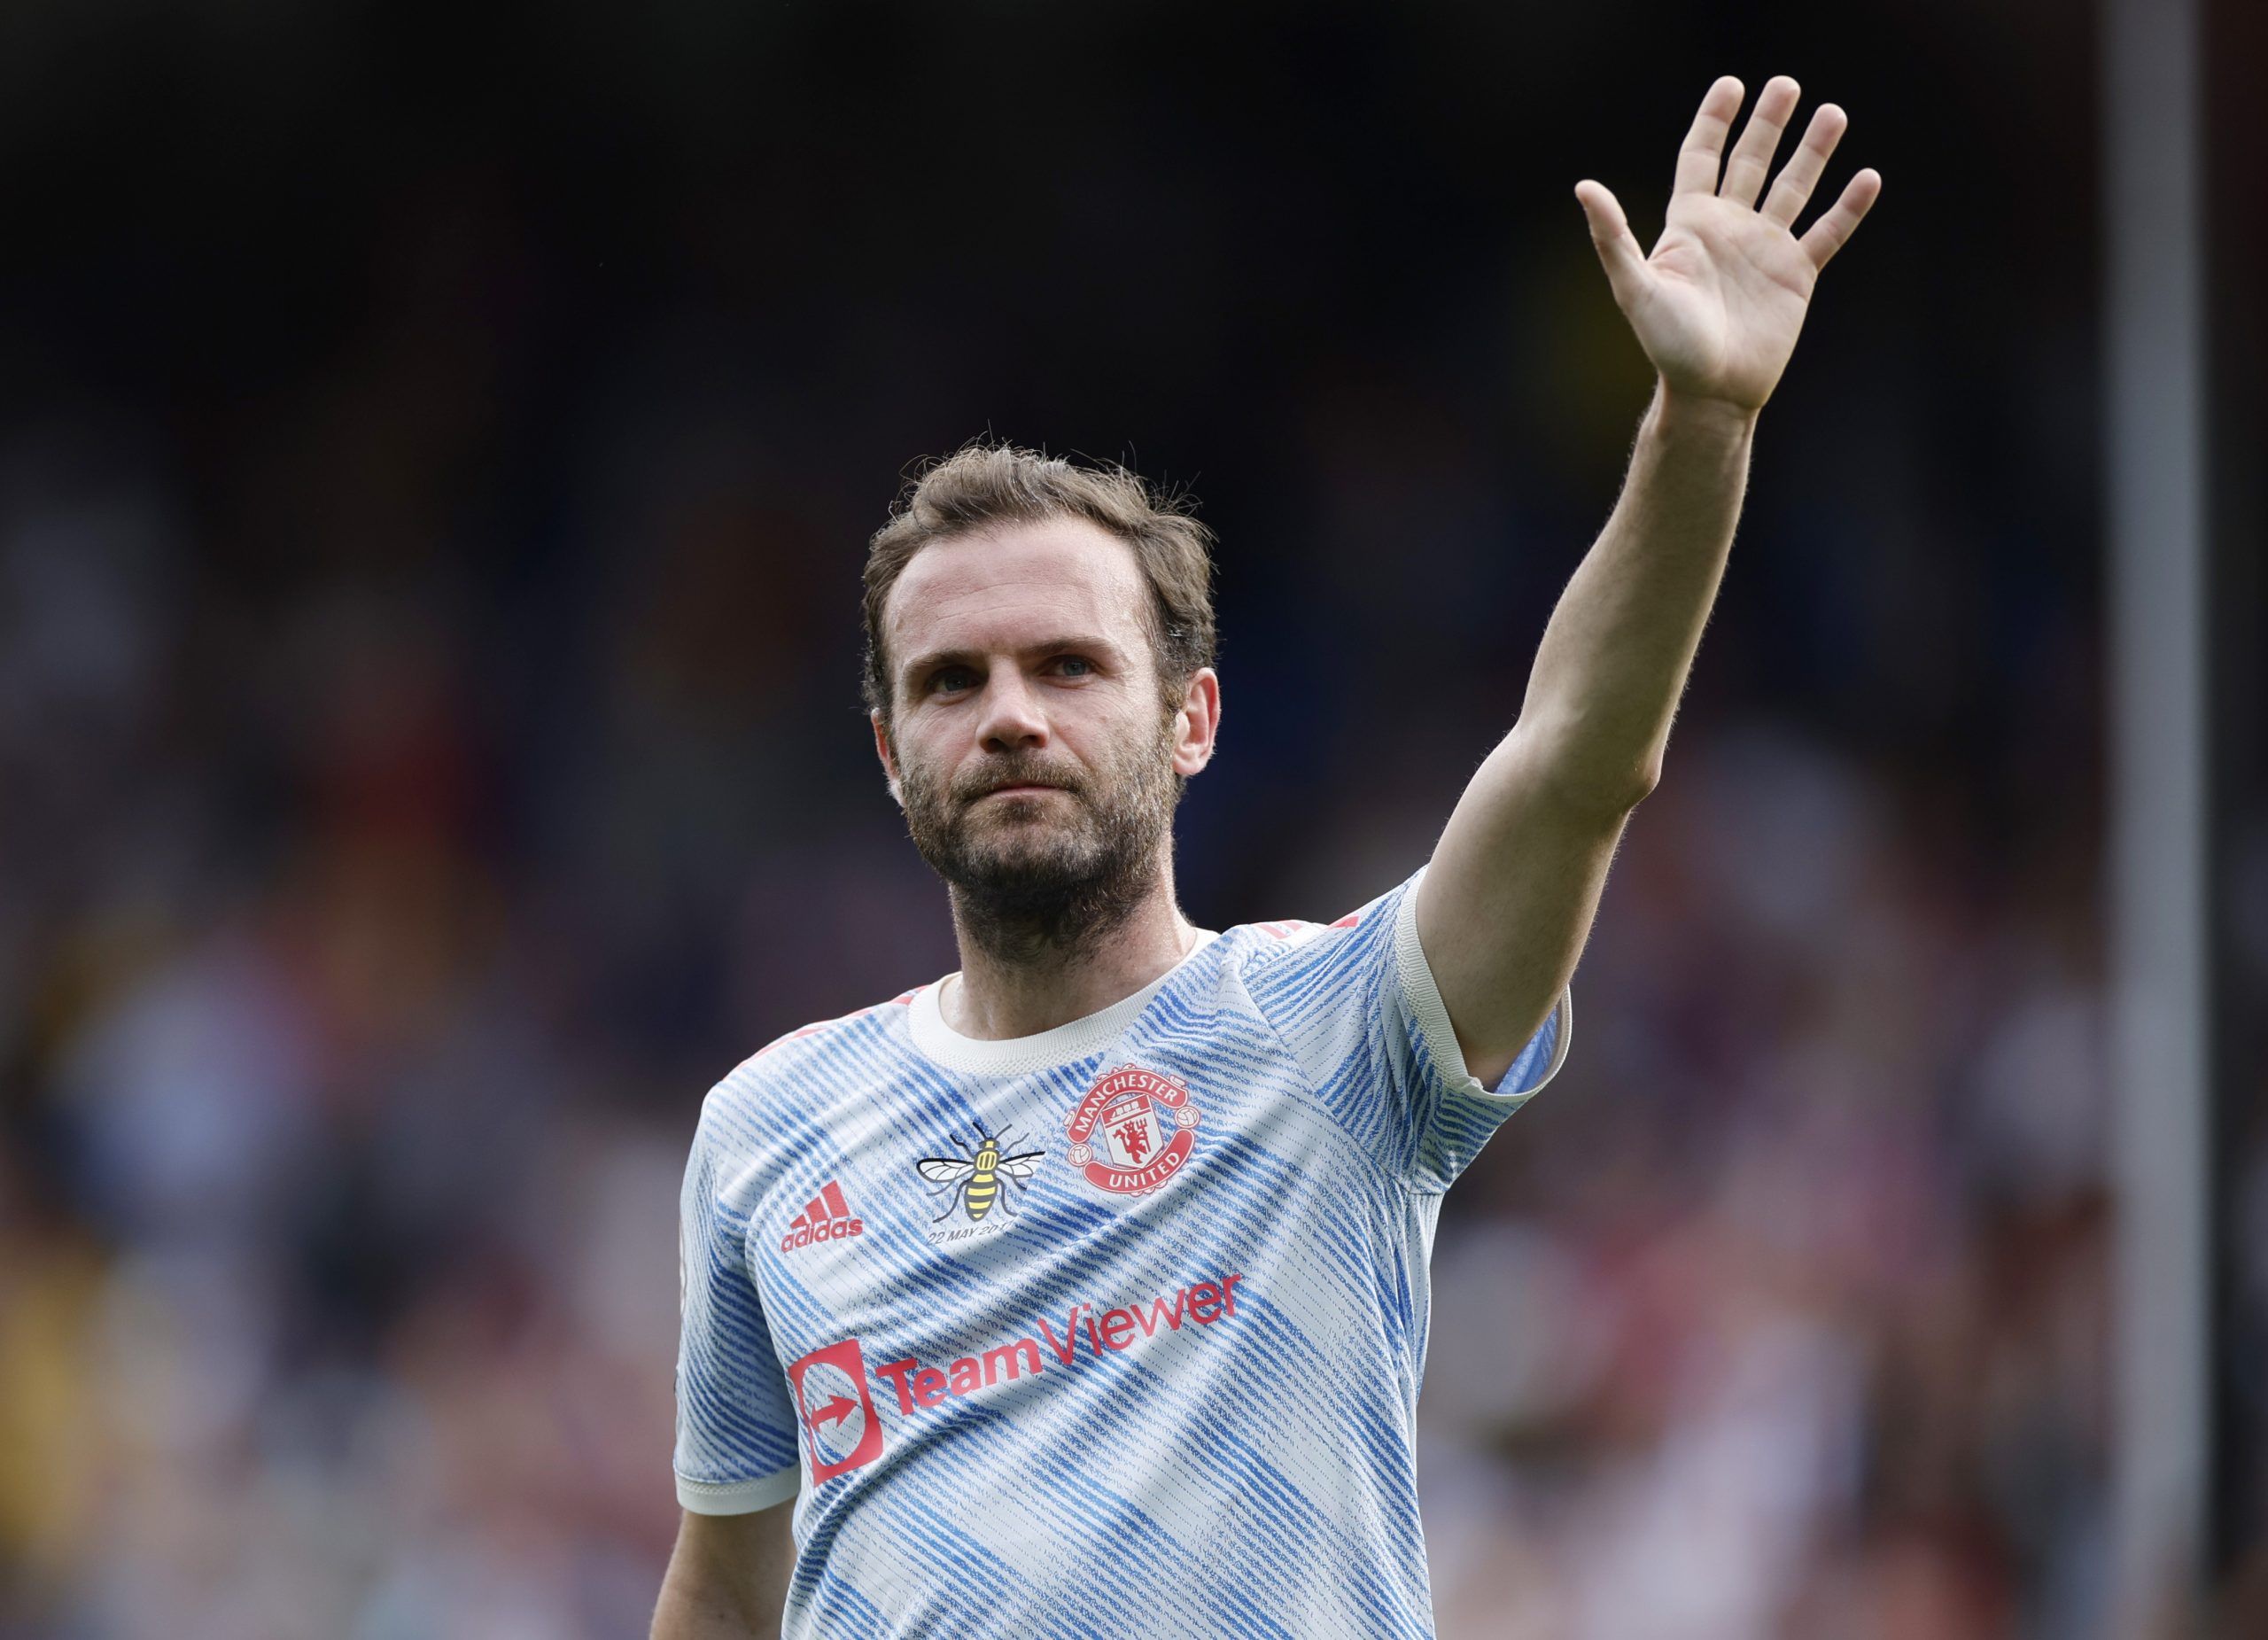 Soccer Football - Premier League - Crystal Palace v Manchester United - Selhurst Park, London, Britain - May 22, 2022 Manchester United's Juan Mata acknowledges fans after the match Action Images via Reuters/John Sibley EDITORIAL USE ONLY. No use with unauthorized audio, video, data, fixture lists, club/league logos or 'live' services. Online in-match use limited to 75 images, no video emulation. No use in betting, games or single club /league/player publications.  Please contact your account re